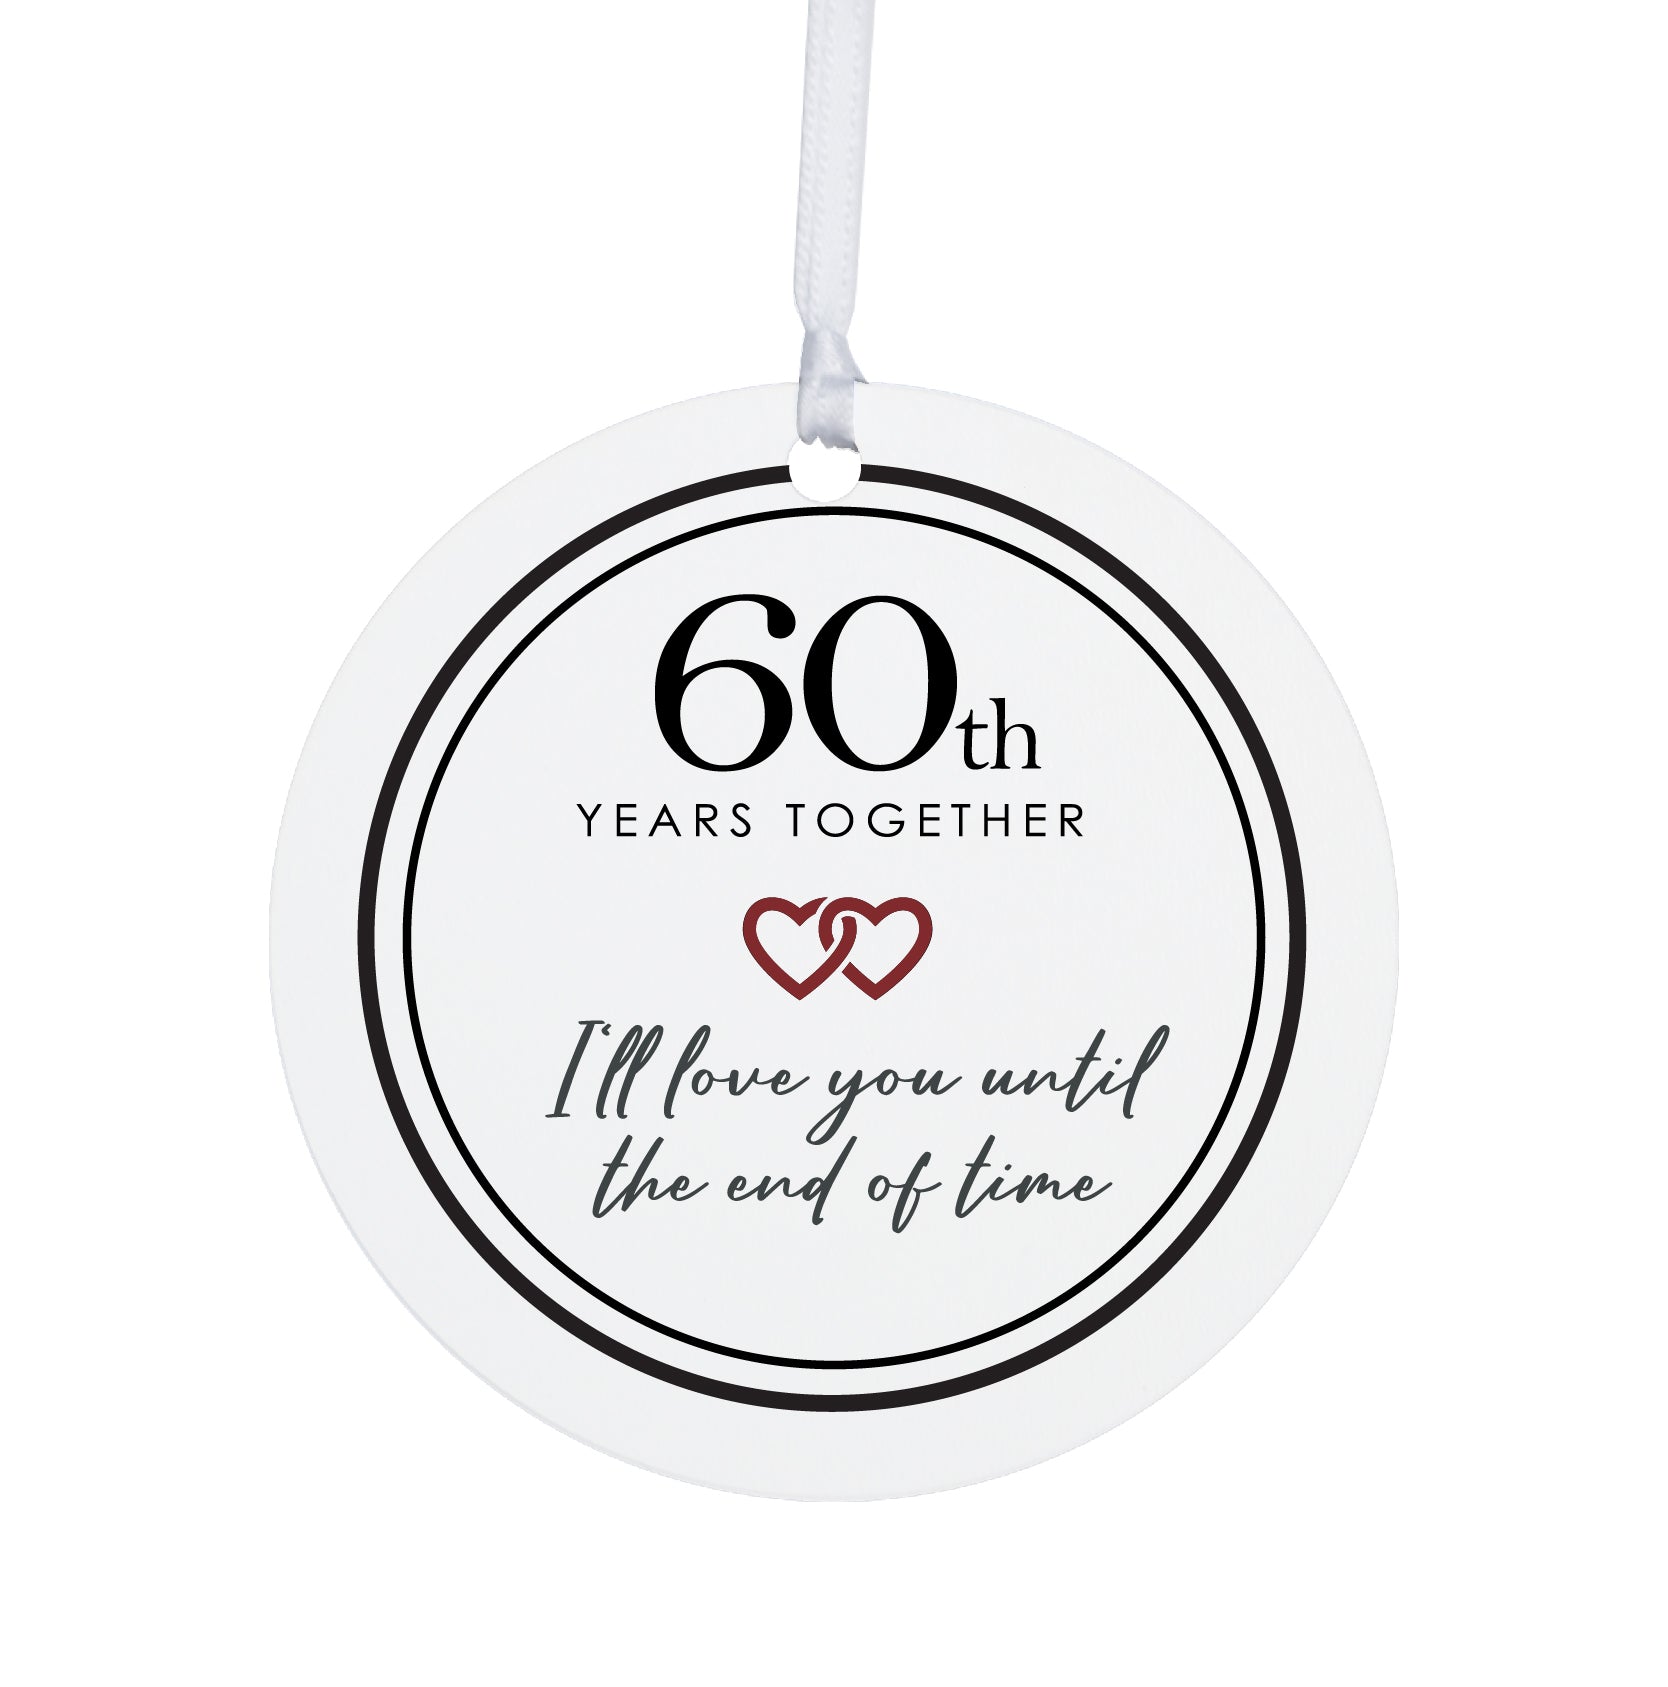 60th-Year Together Wedding Anniversary White Ornament With Inspirational Message Gift Ideas - I Love You Till The End Of Time